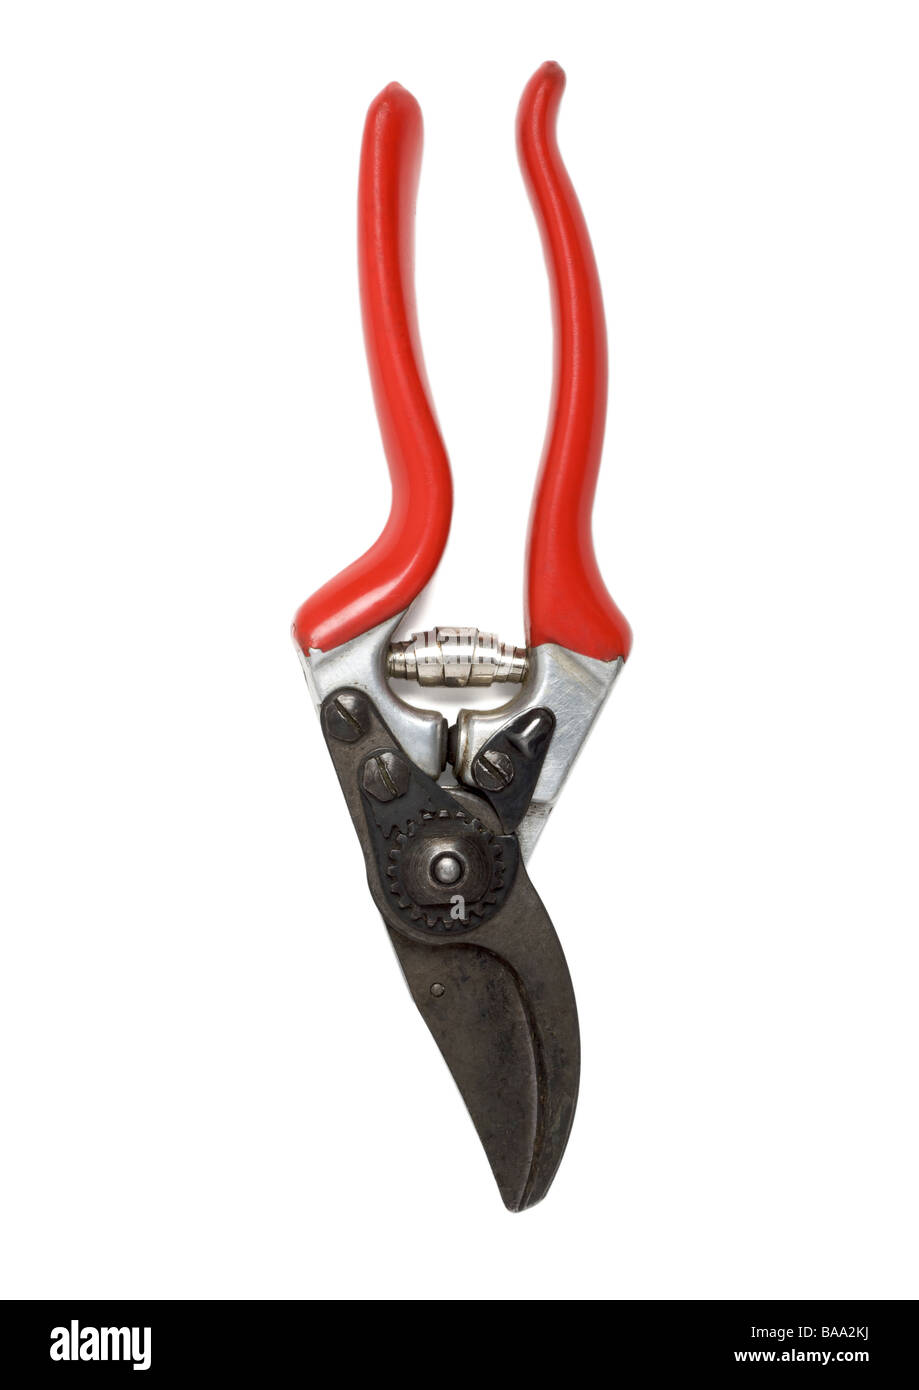 Old pruning shears on white background Stock Photo